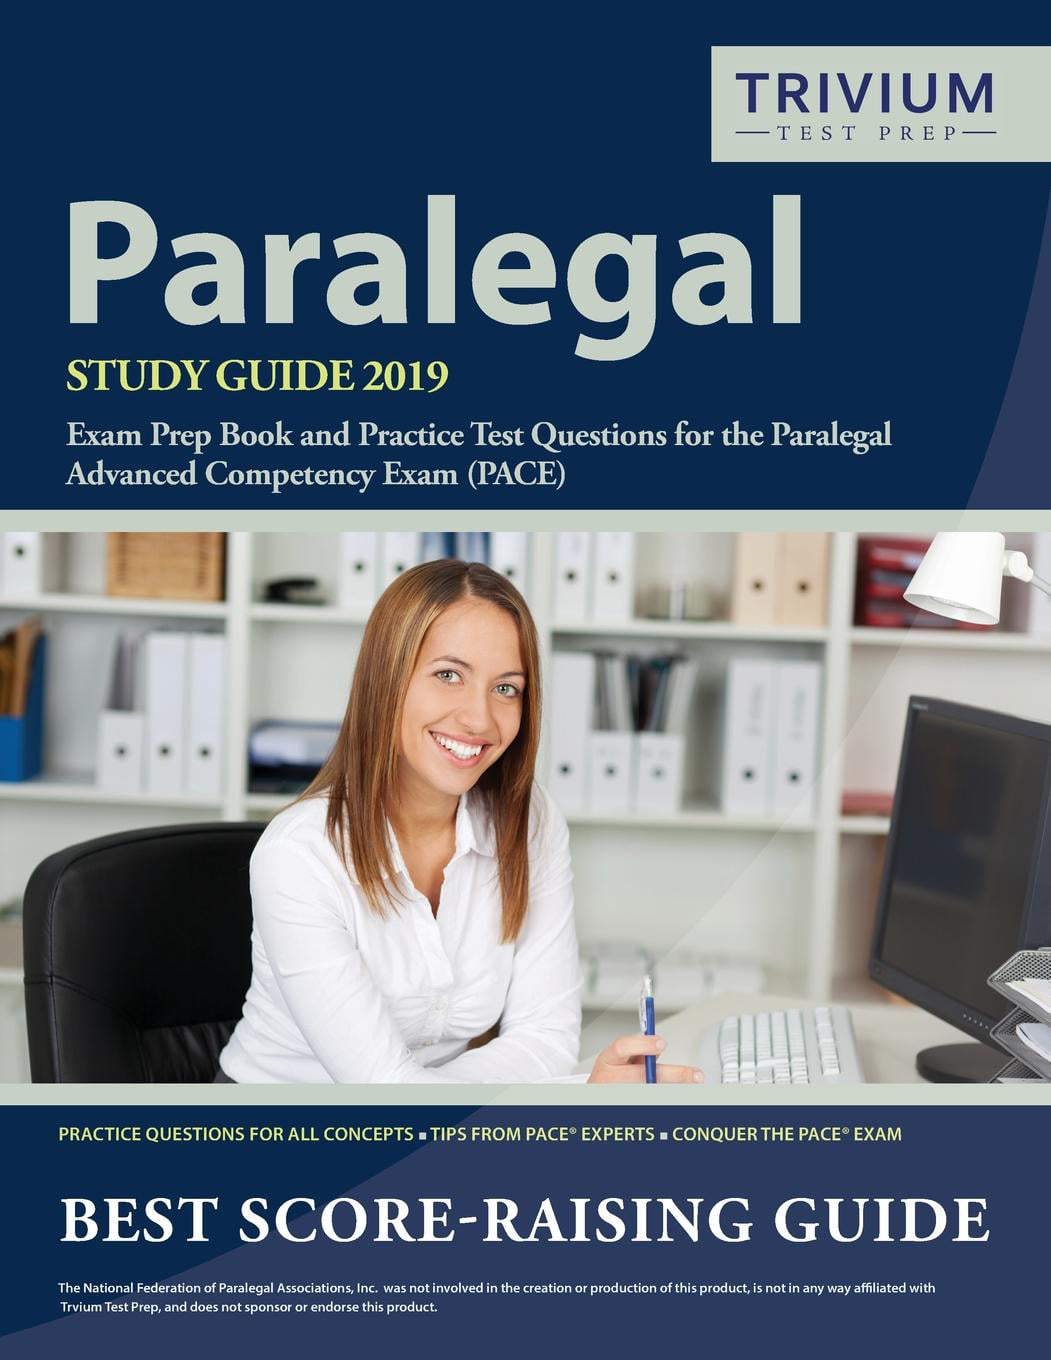 paralegal-study-guide-2019-exam-prep-book-and-practice-test-questions-for-the-paralegal